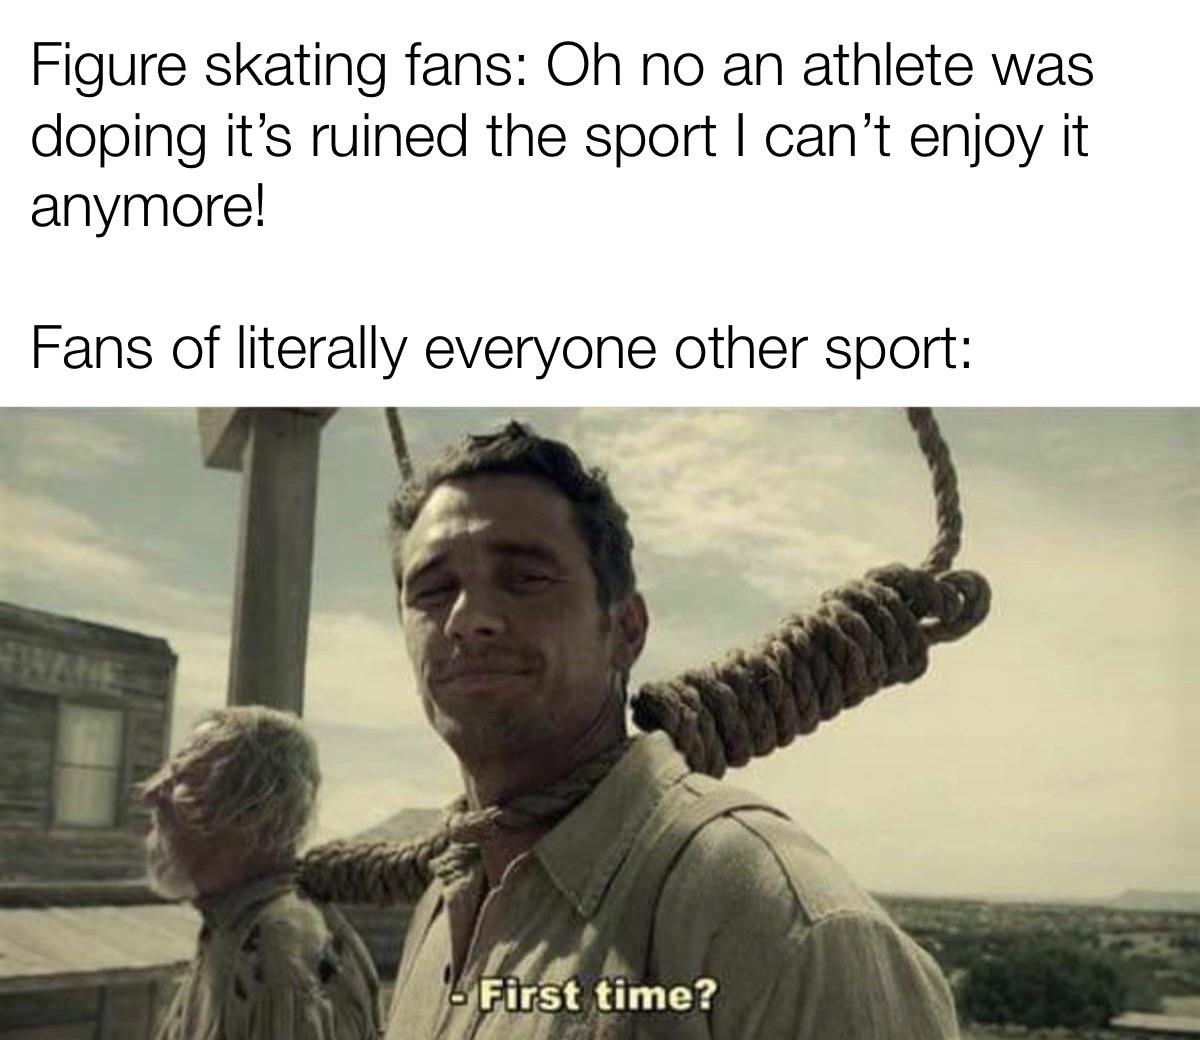 dank memes - funny memes - pajama day at school meme - Figure skating fans Oh no an athlete was doping it's ruined the sport I can't enjoy it anymore! Fans of literally everyone other sport 6 First time?